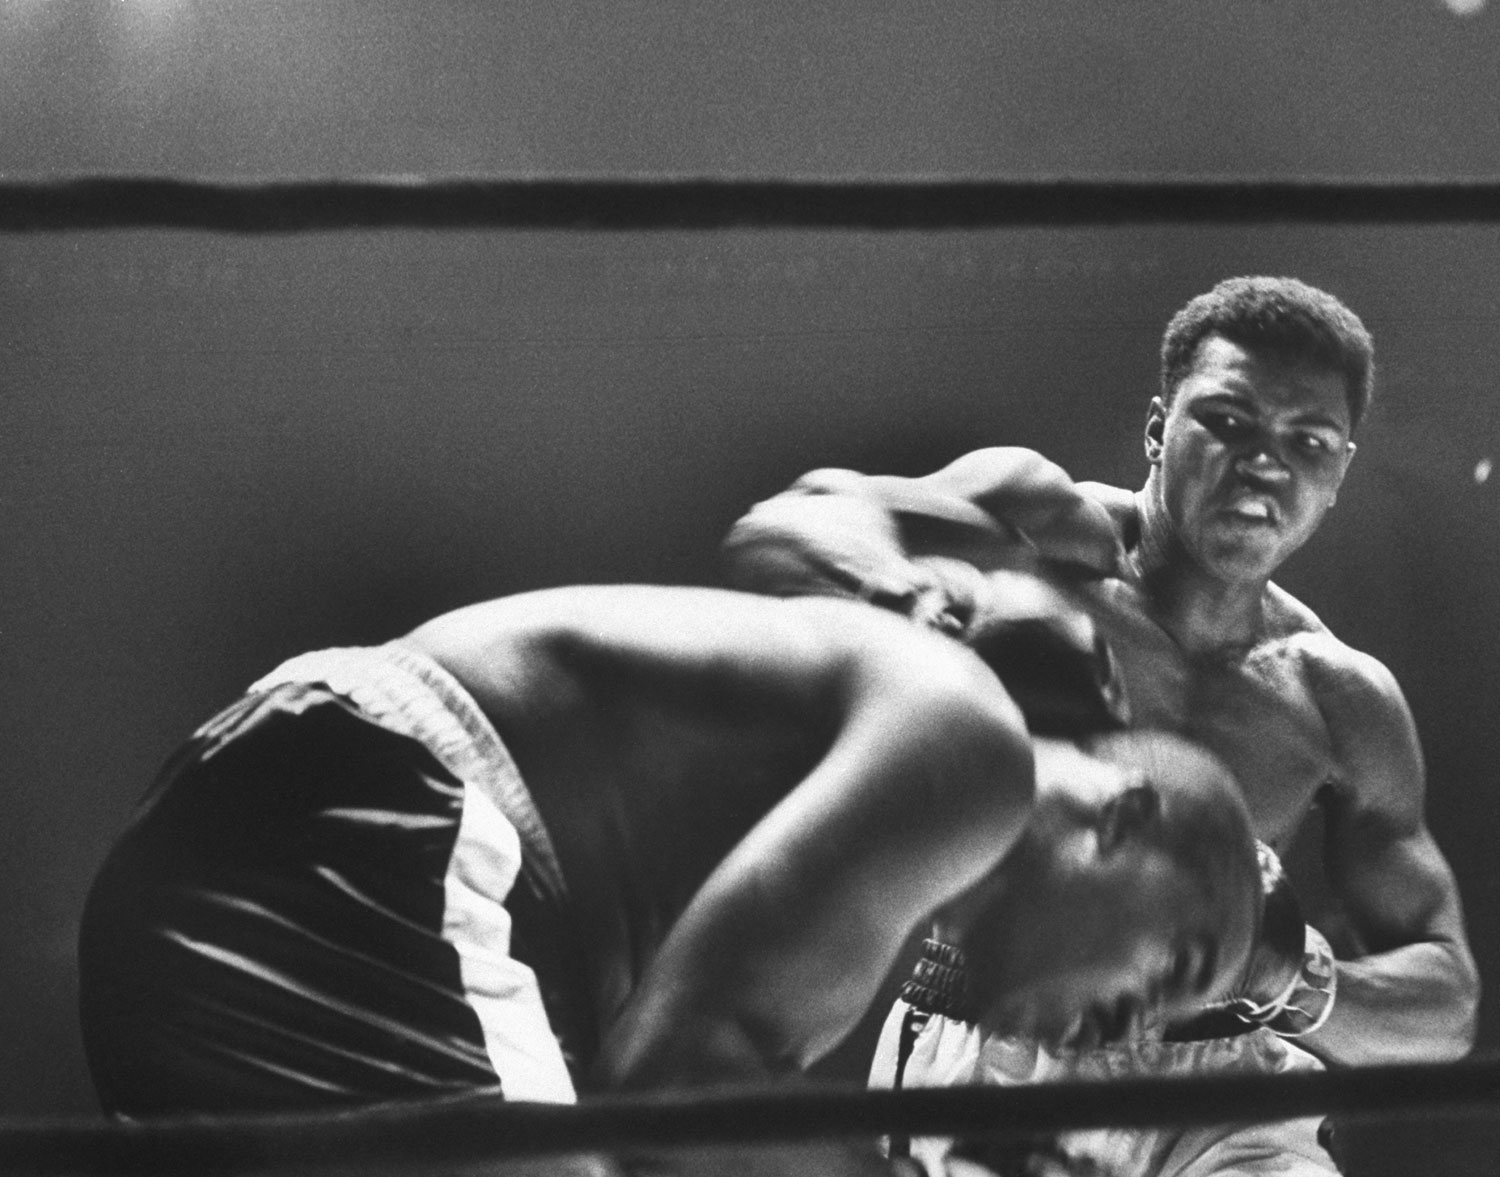 Heavyweight bout in which Cassius Clay (R) (later Muhammad Ali) narrowly defeated Doug Jones.